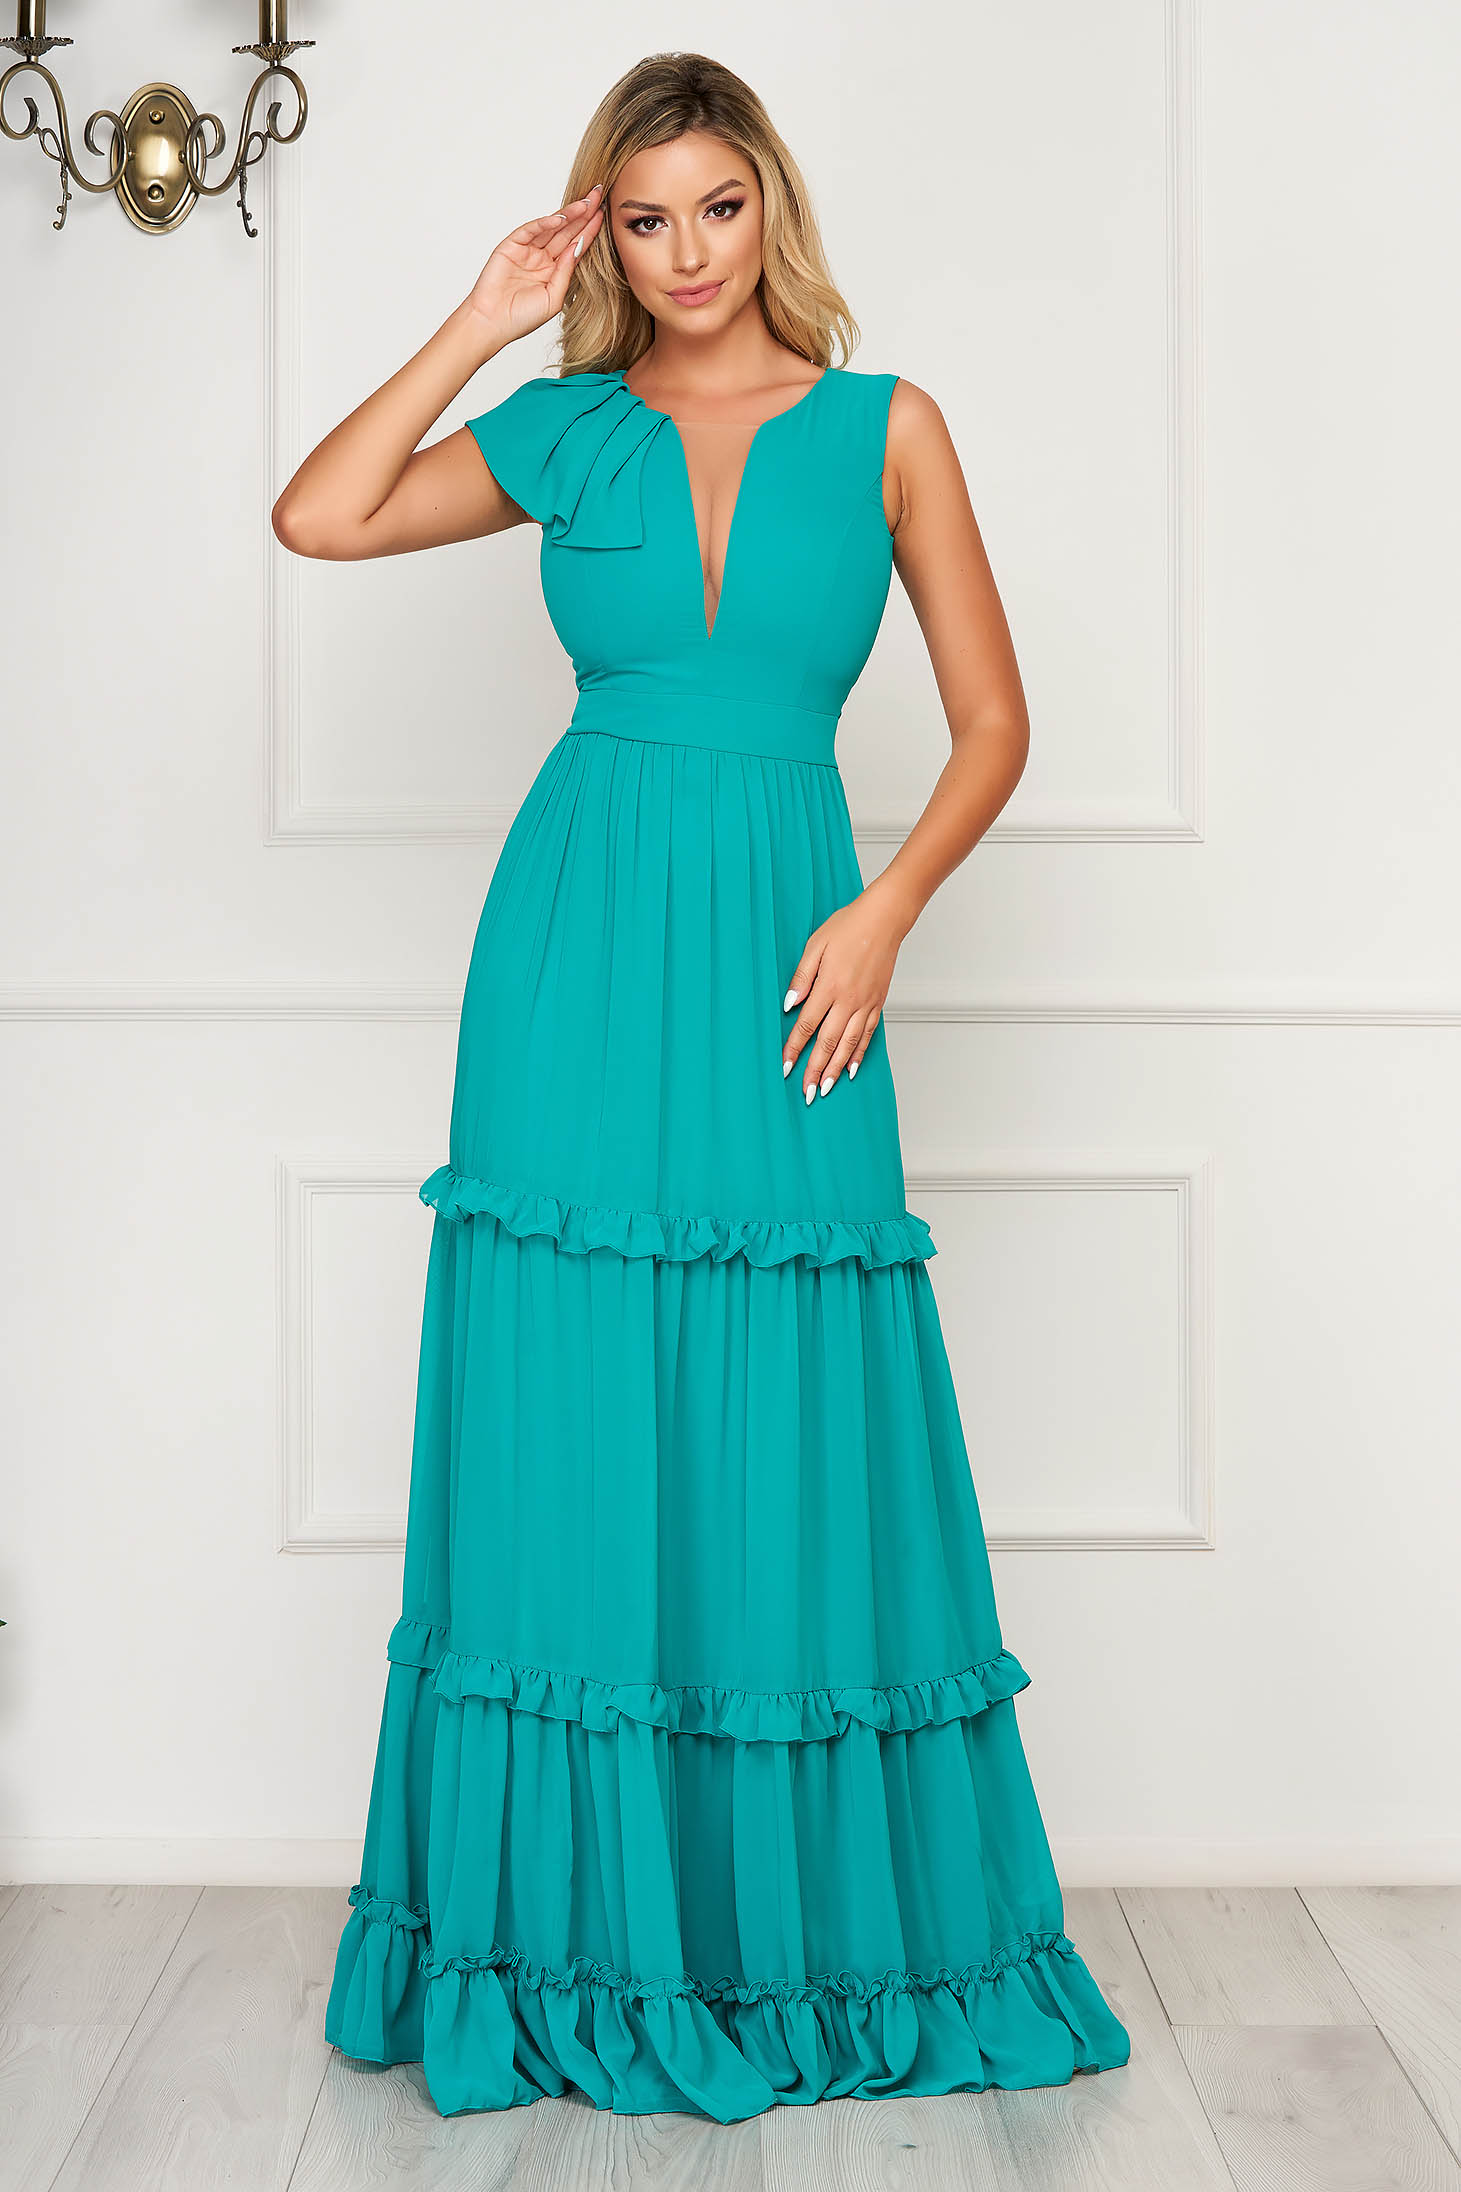 Green dress with v-neckline with ruffle details from veil fabric